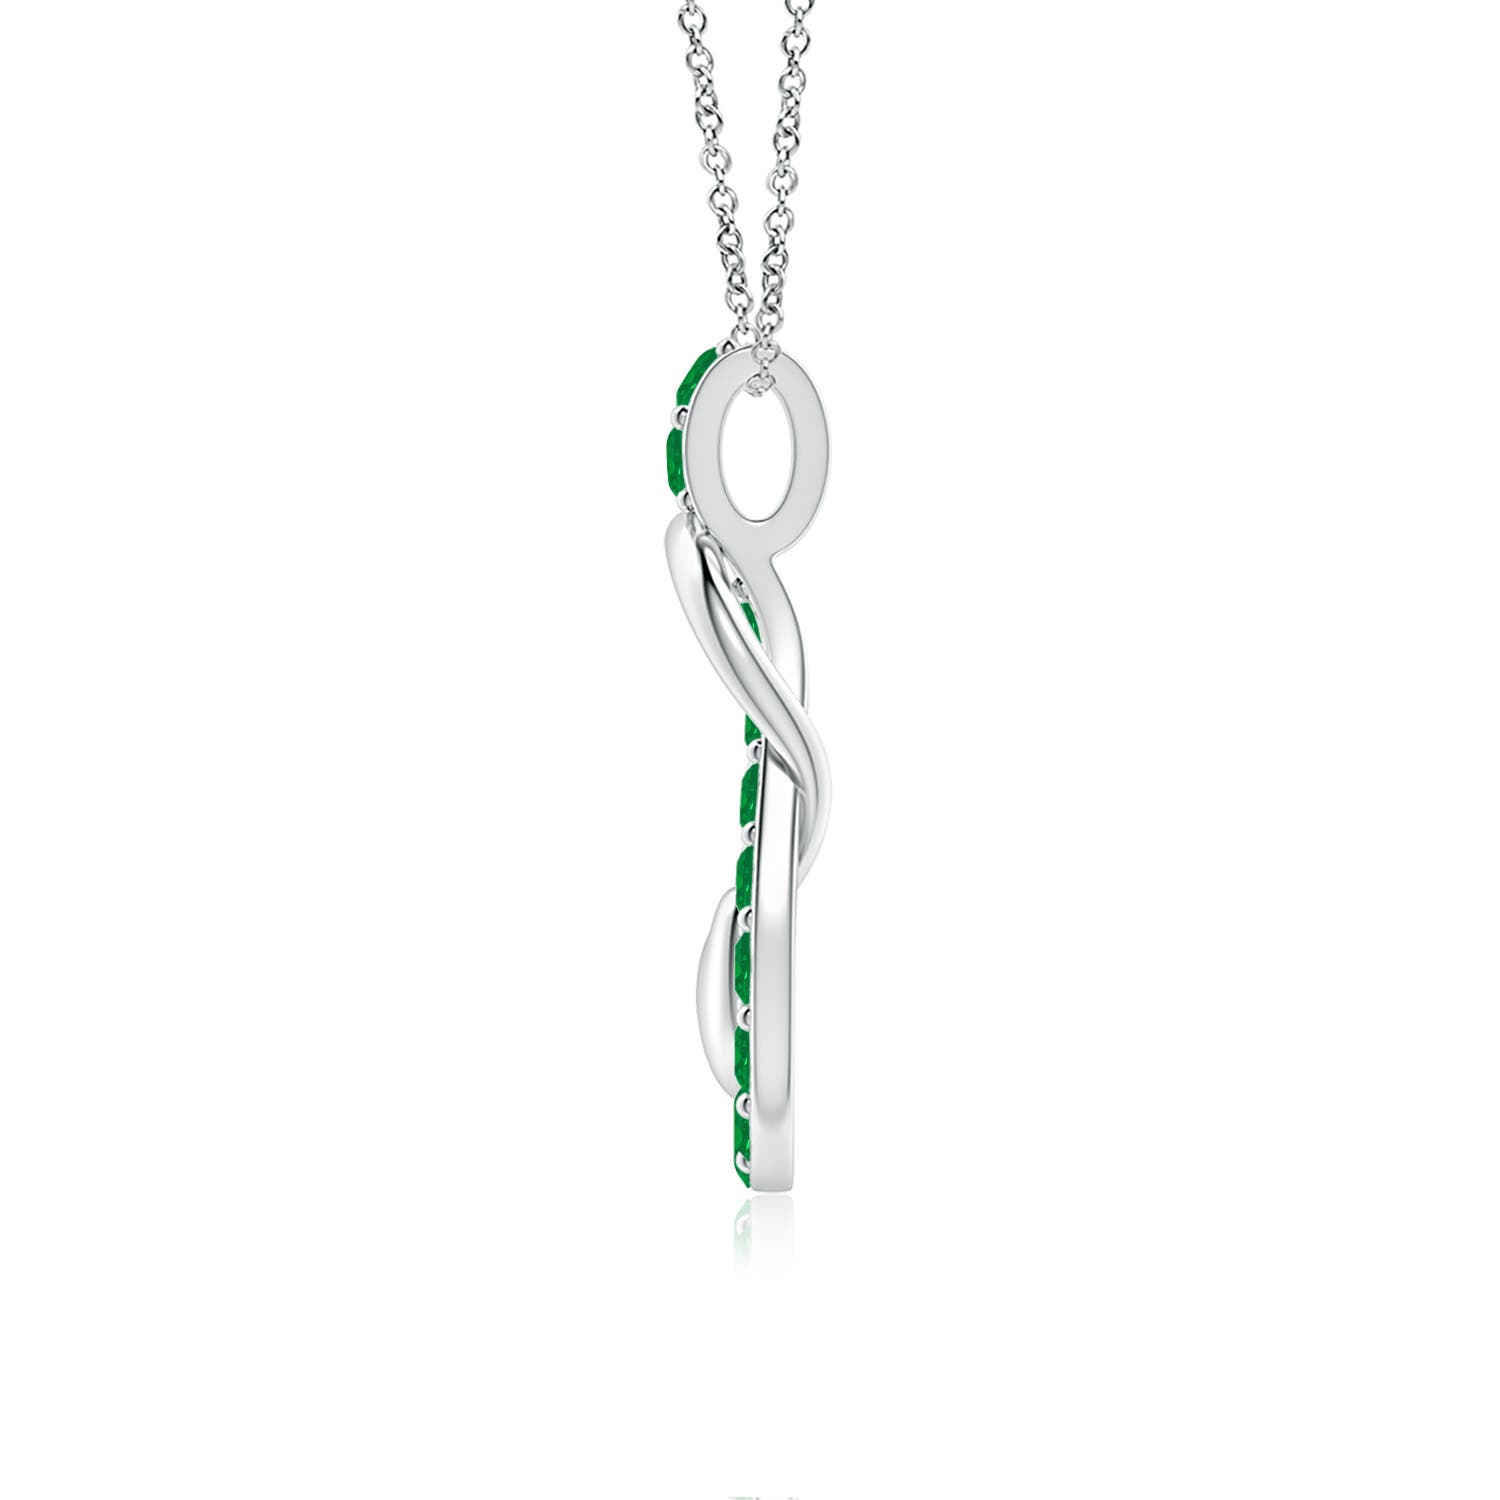 AA - Emerald / 1.2 CT / 14 KT White Gold